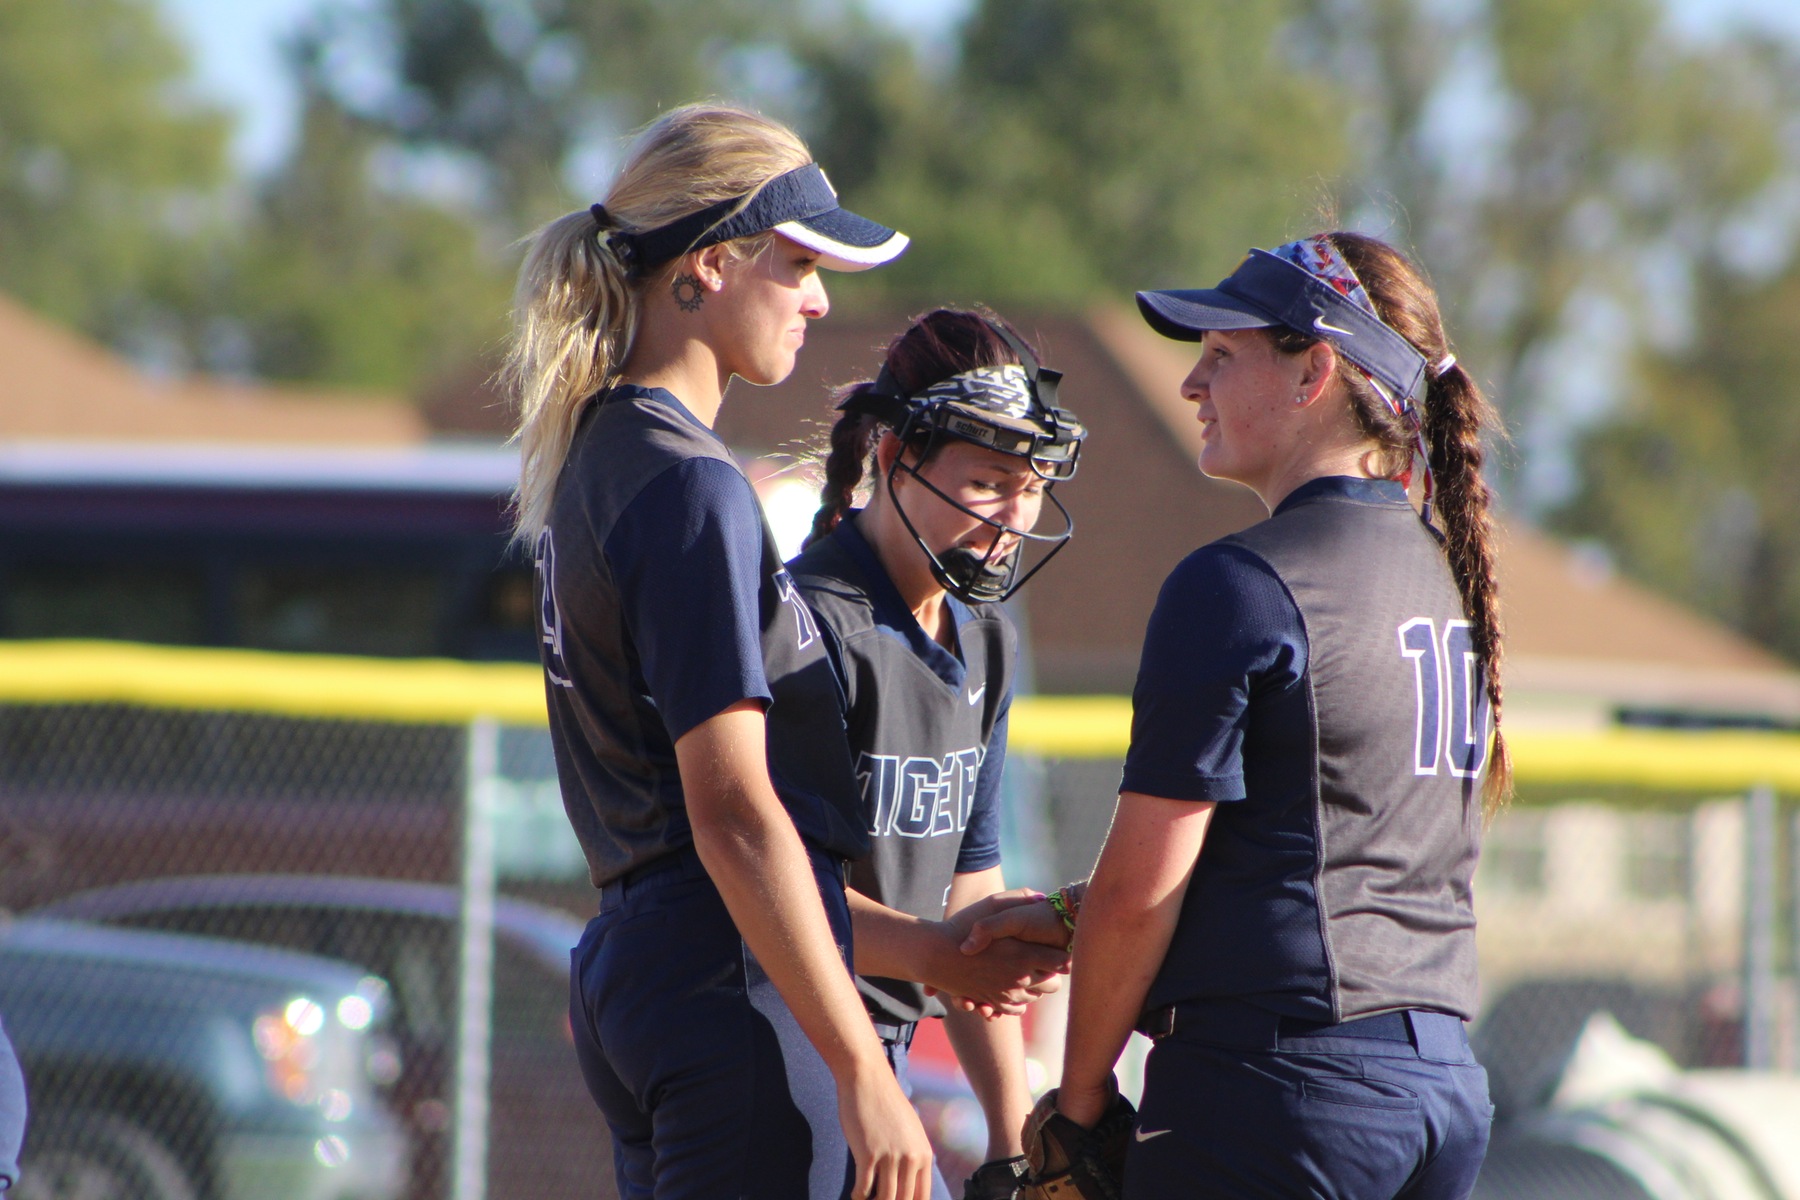 The MCC softball team split a pair of games in Clermont, FL on Friday